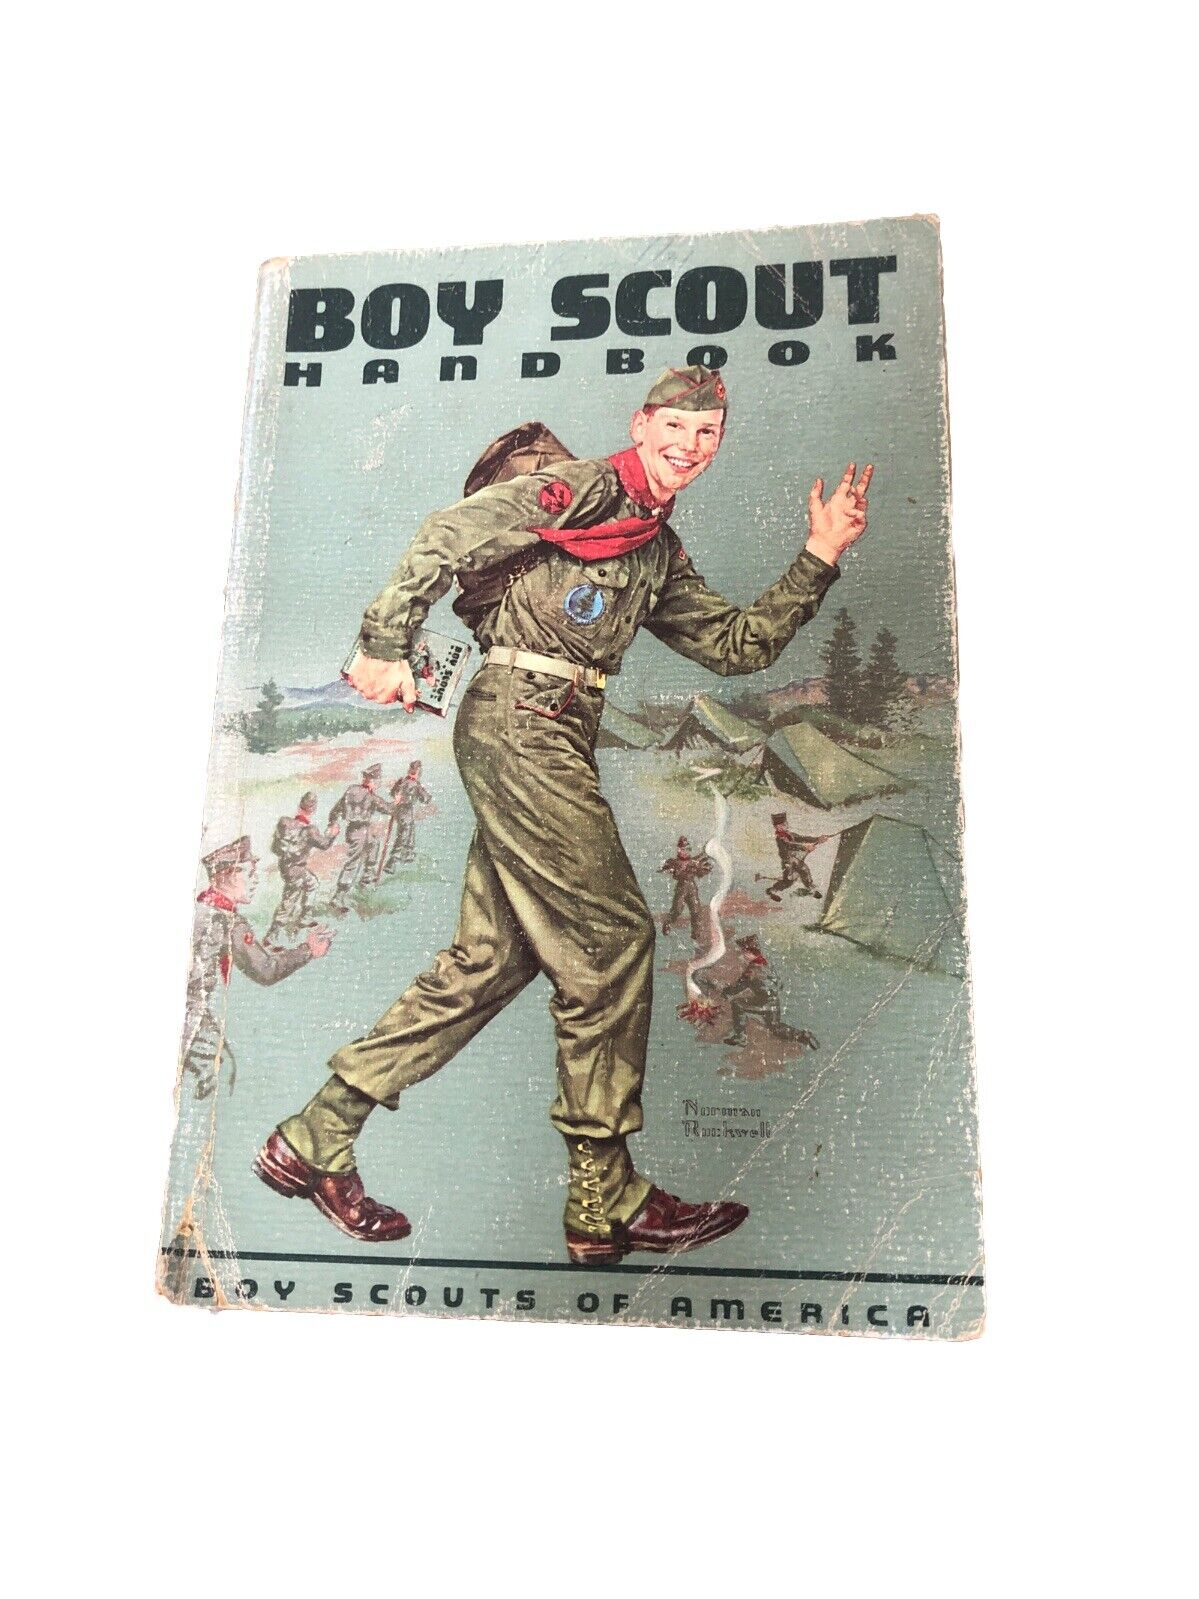 1962 Boy Scout Handbook Norman Rockwell Cover Nice Advertisements